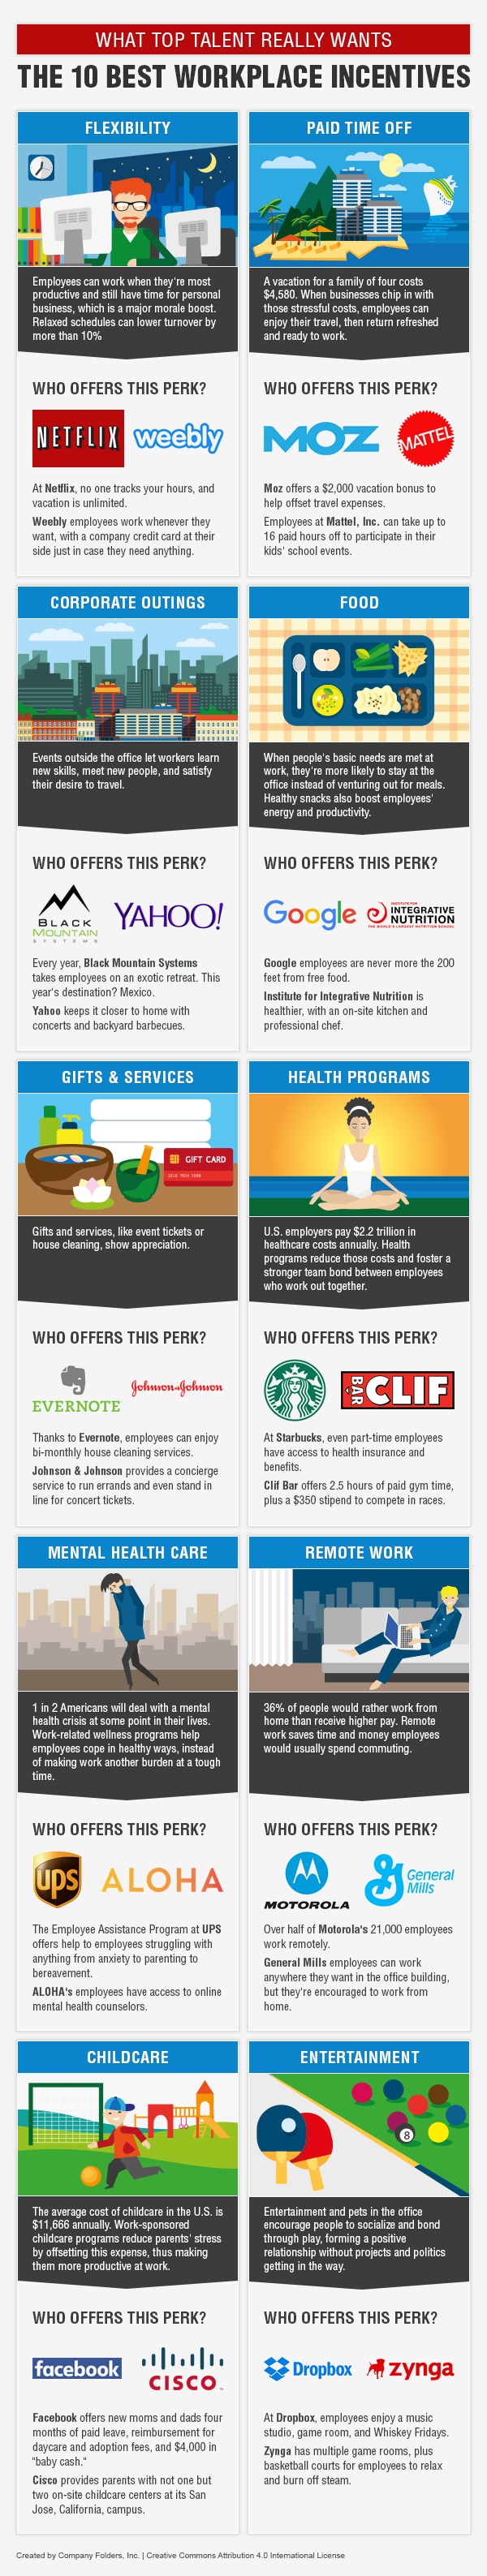 Business Owner Employee Perks Infographic